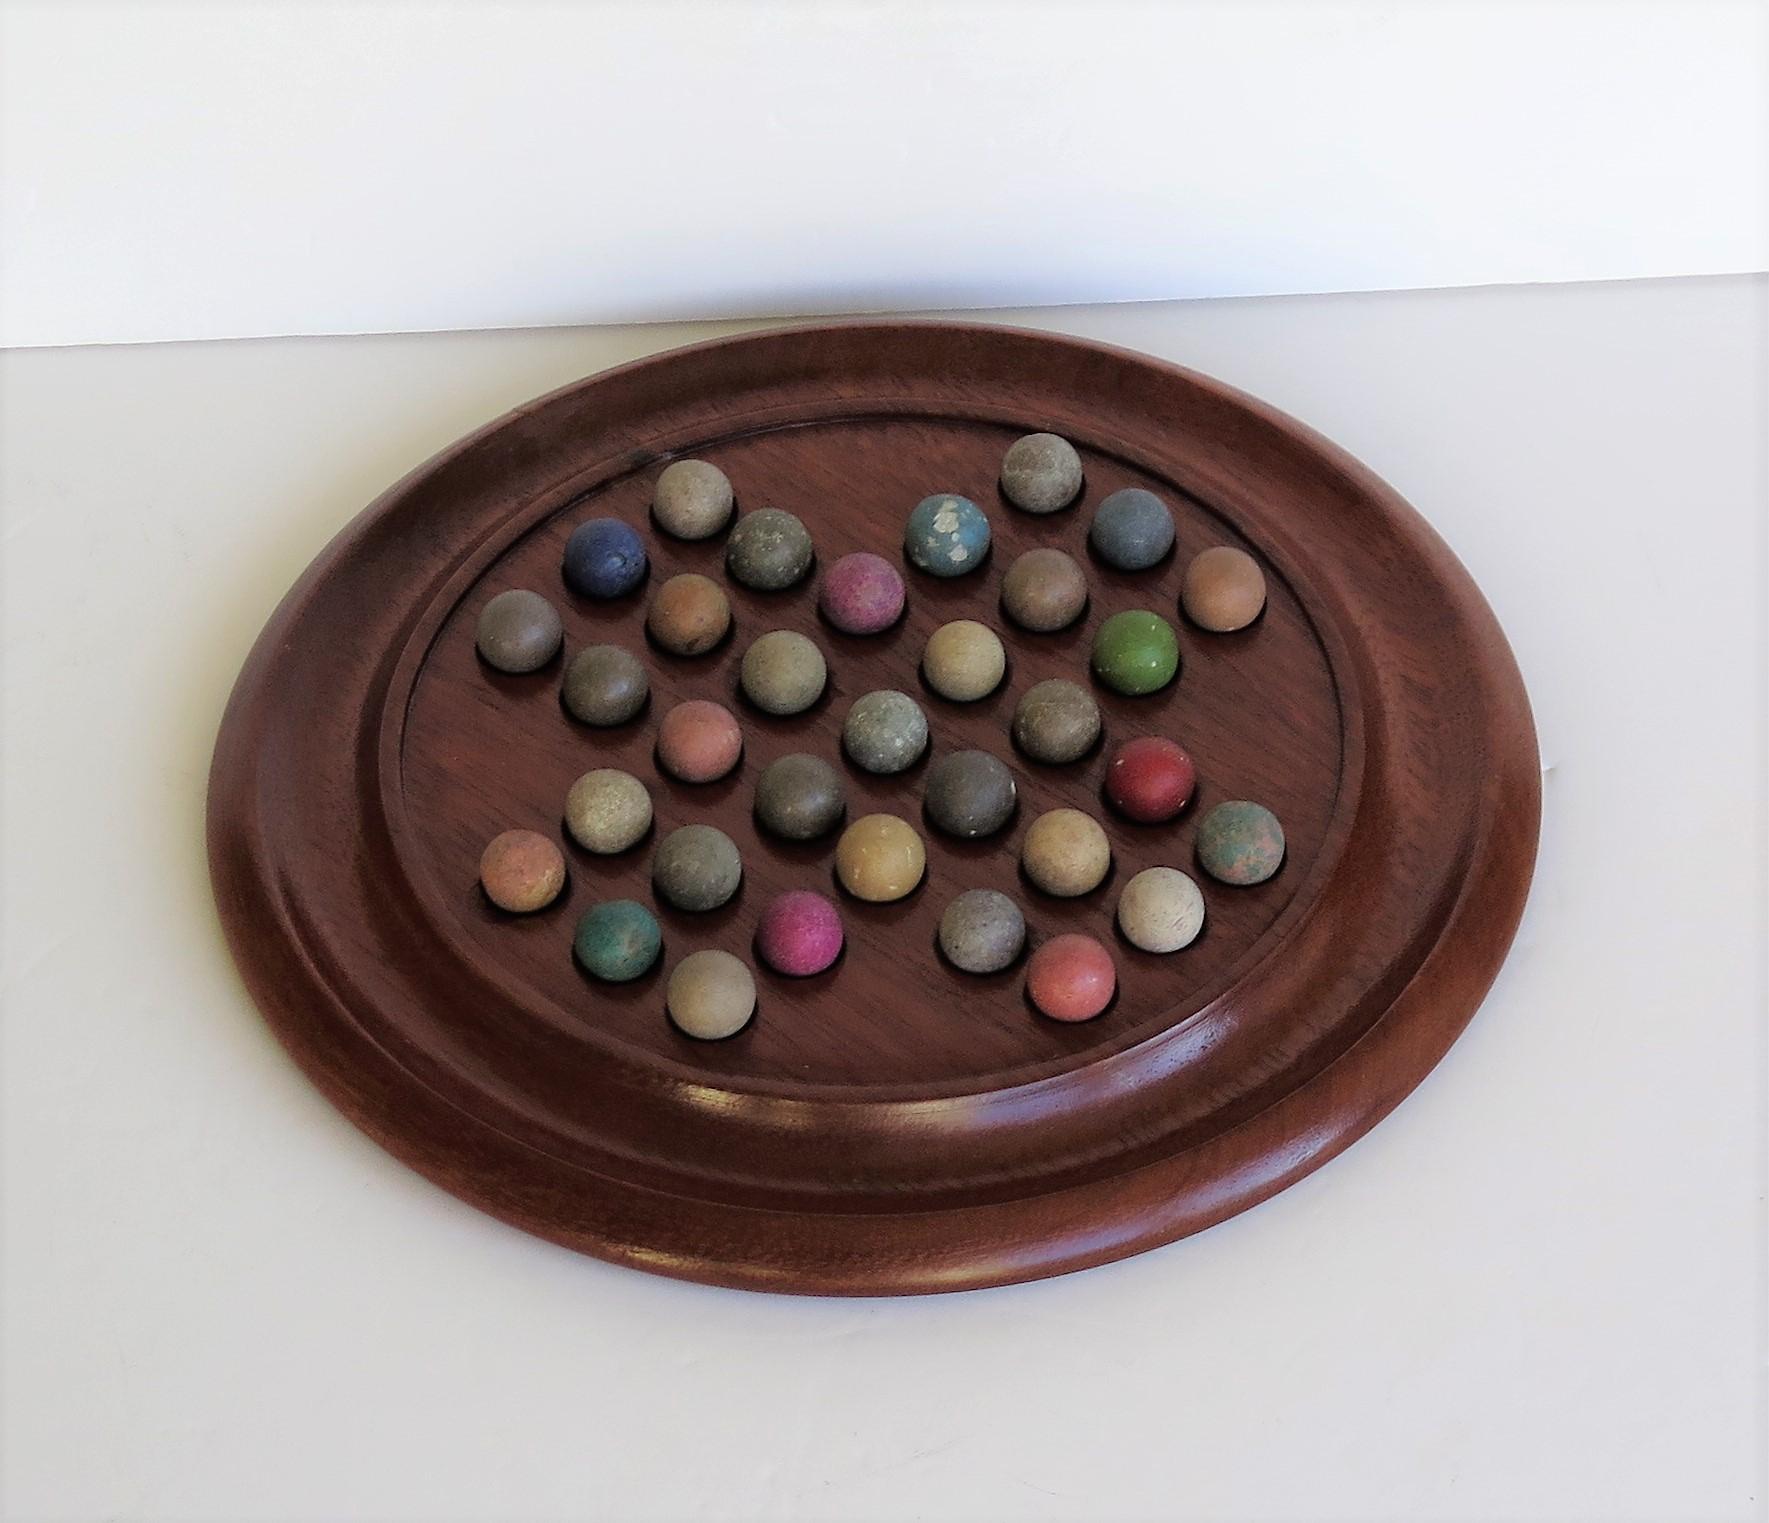 This is a complete marble solitaire game, having a very good hardwood board and a complete set of 33 clay or stone handmade marbles, all dating to the 19th century Victorian period, circa 1860.

This board is circular hand-turned and made of a